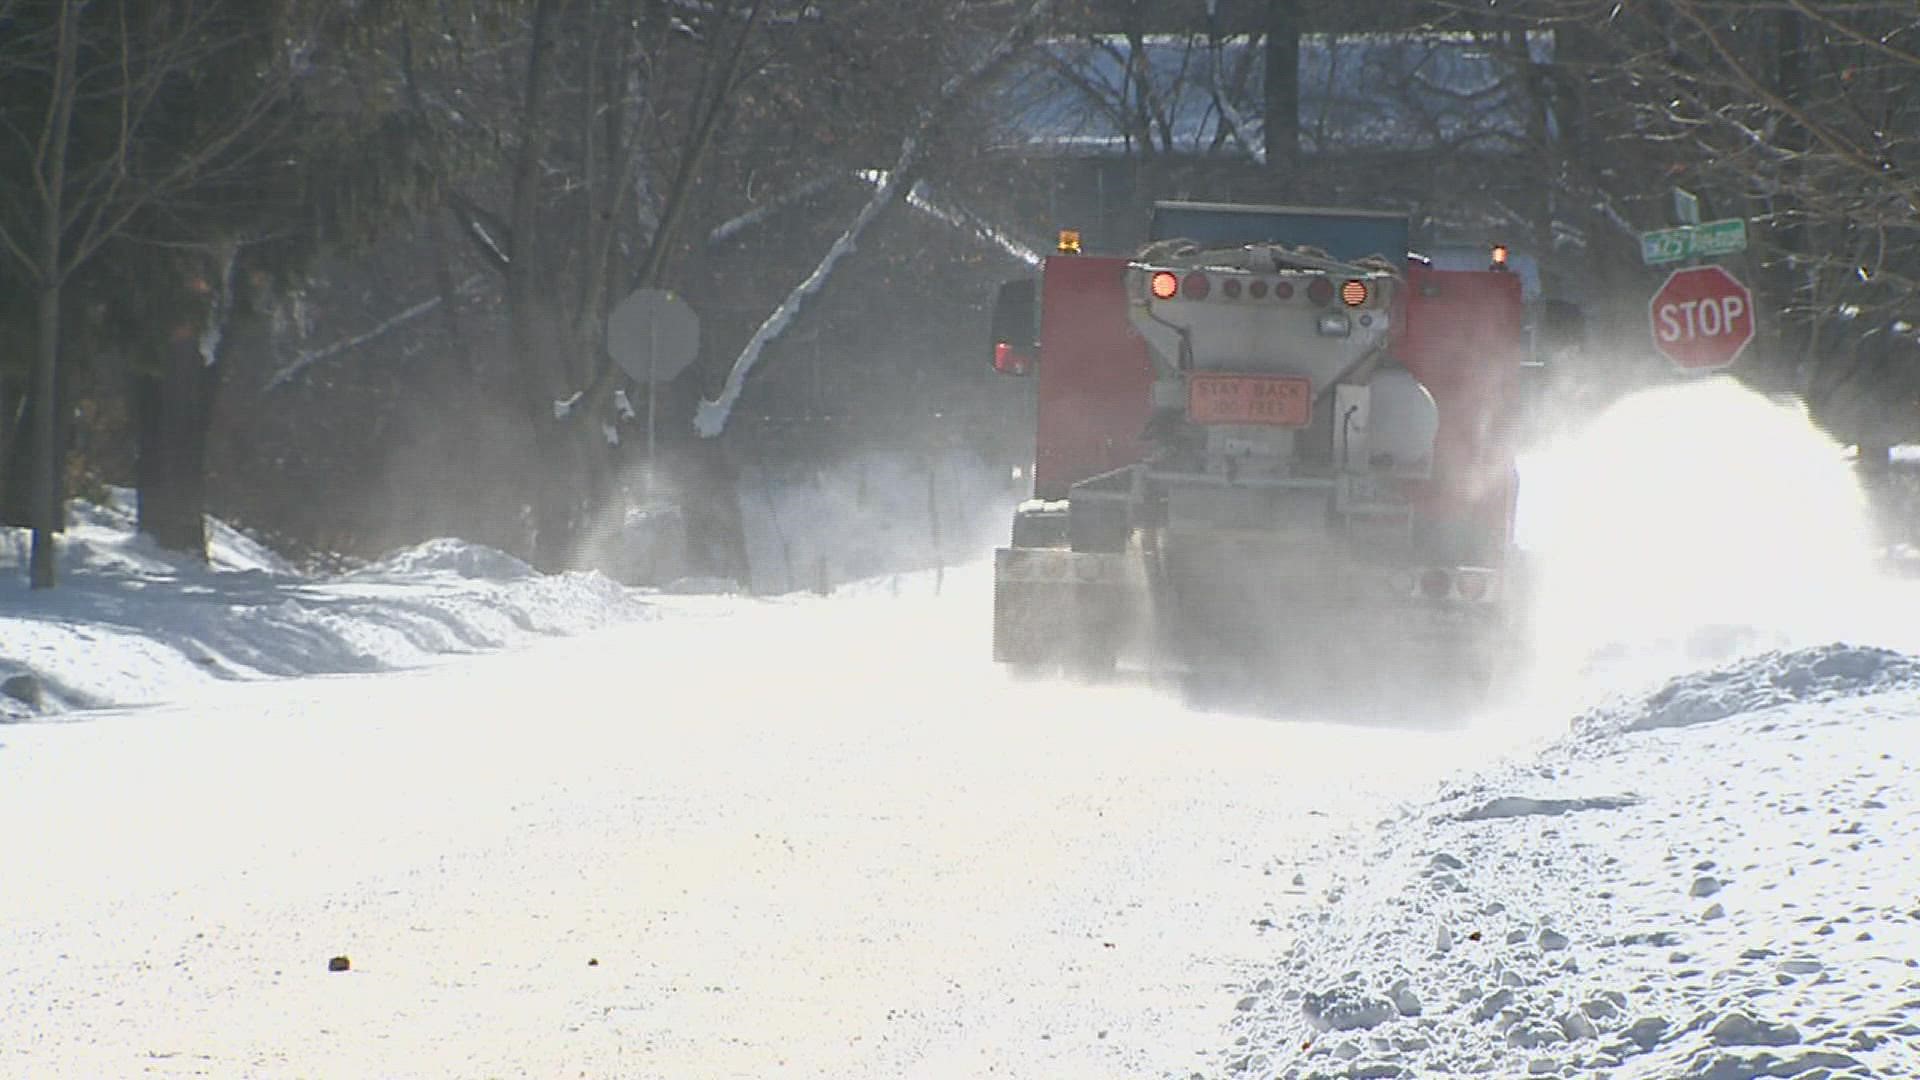 Earlier this year, the City of Moline said it would hire six new workers to help clear snow from residential areas. Three have been hired so far.